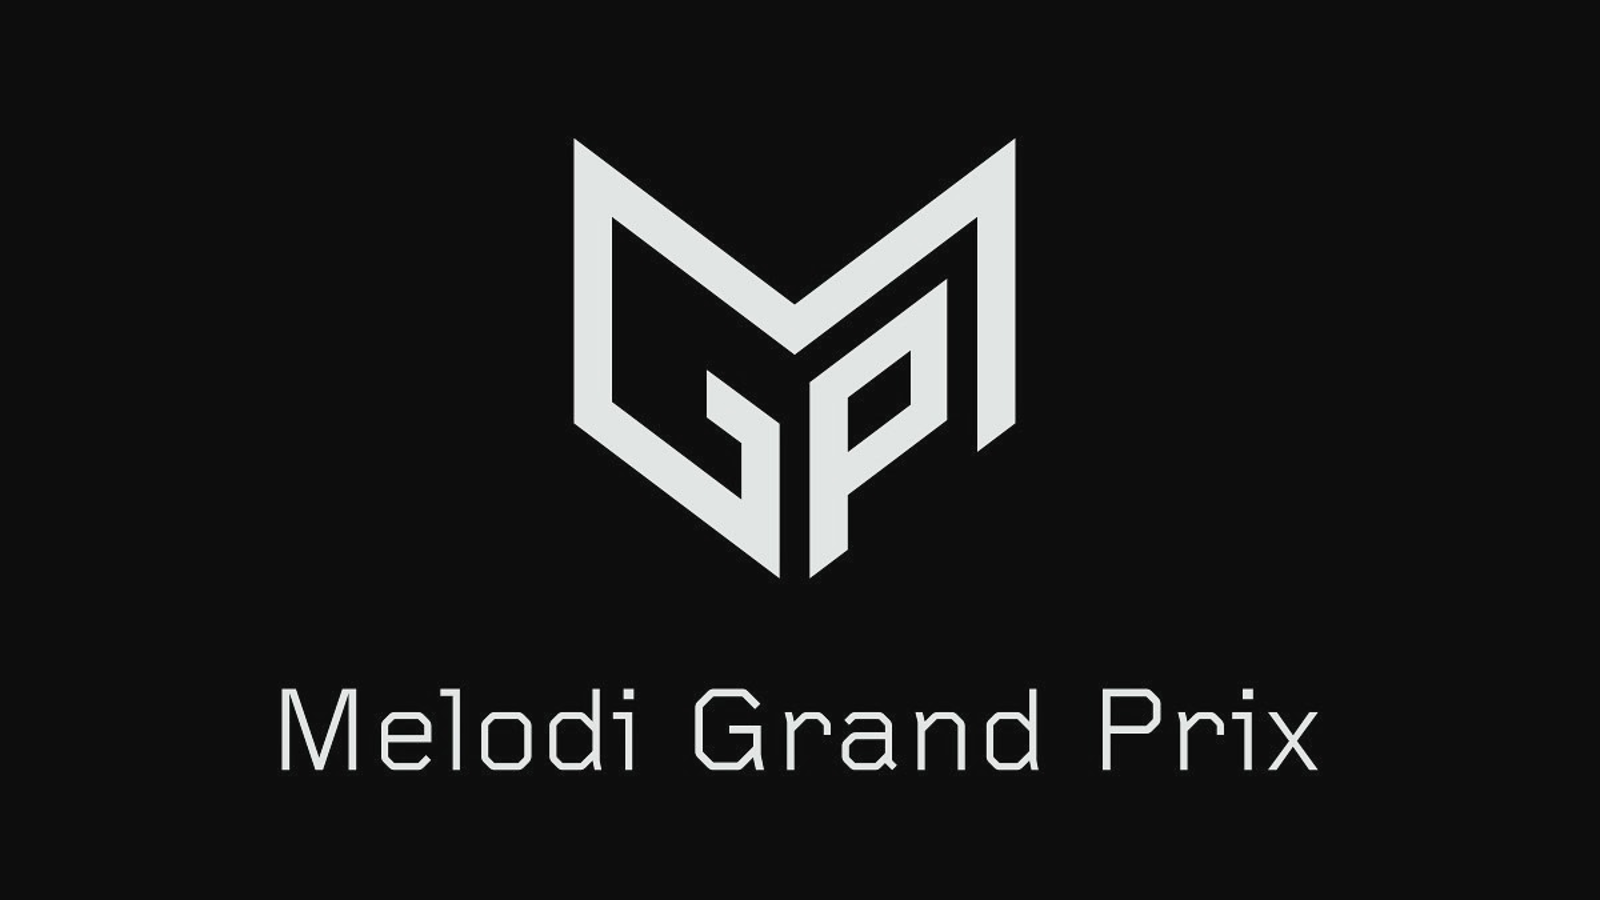 Norway: More than 1000 songs submitted for Melodi Grand Prix 2019